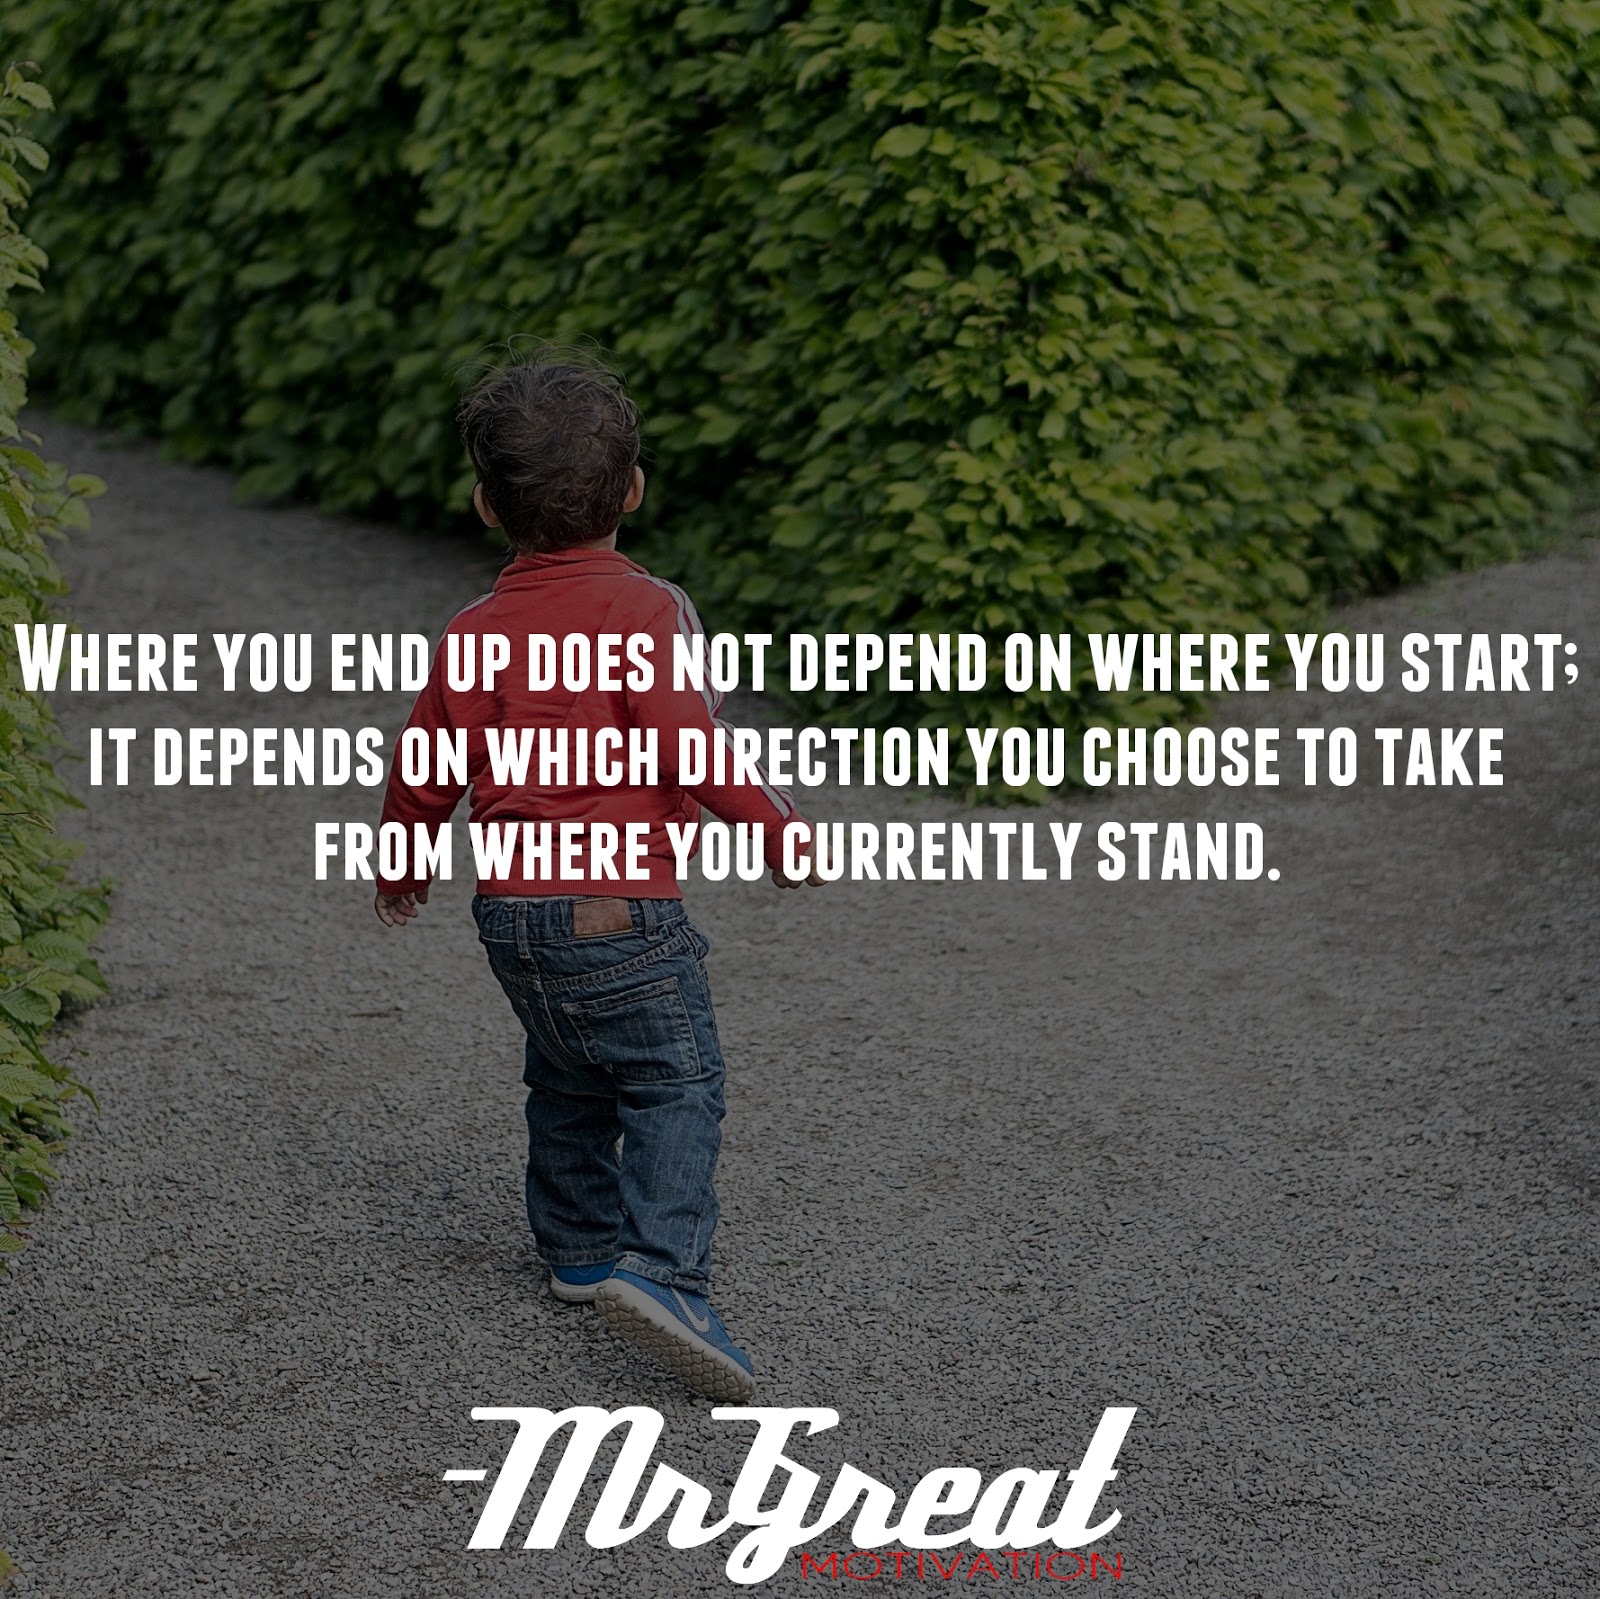 Where you end up does not depend on where you start; it depends on which direction you choose to take from where you currently stand - Kevin Ngo